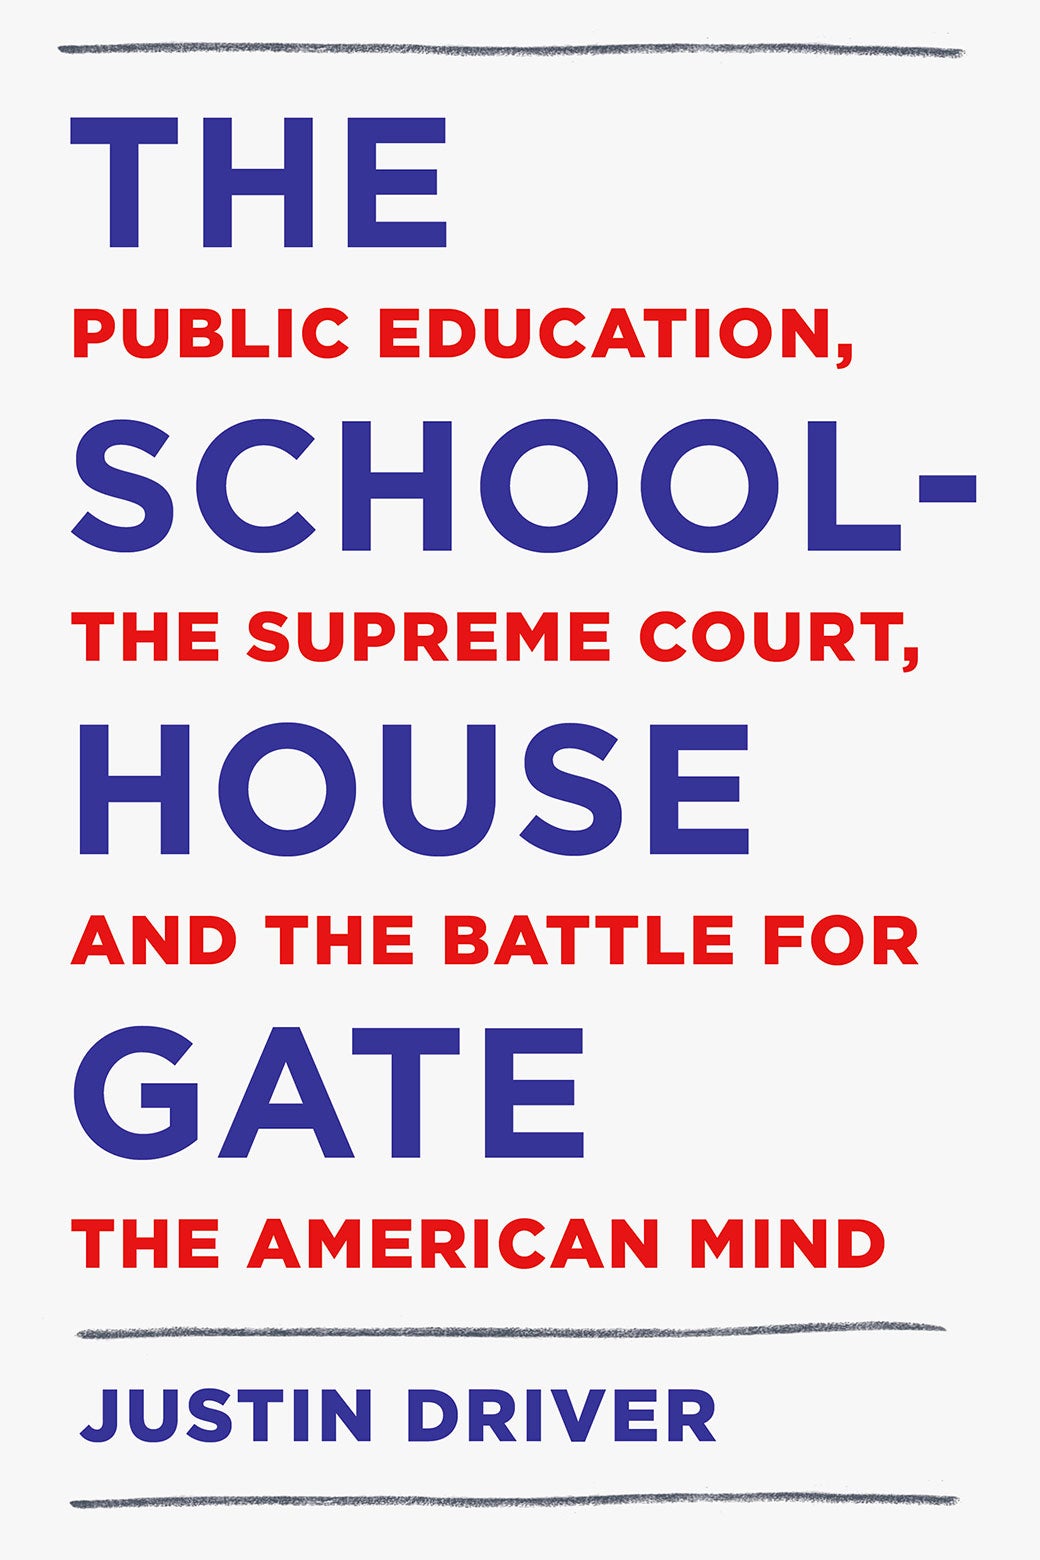 The cover of The Schoolhouse Gate.